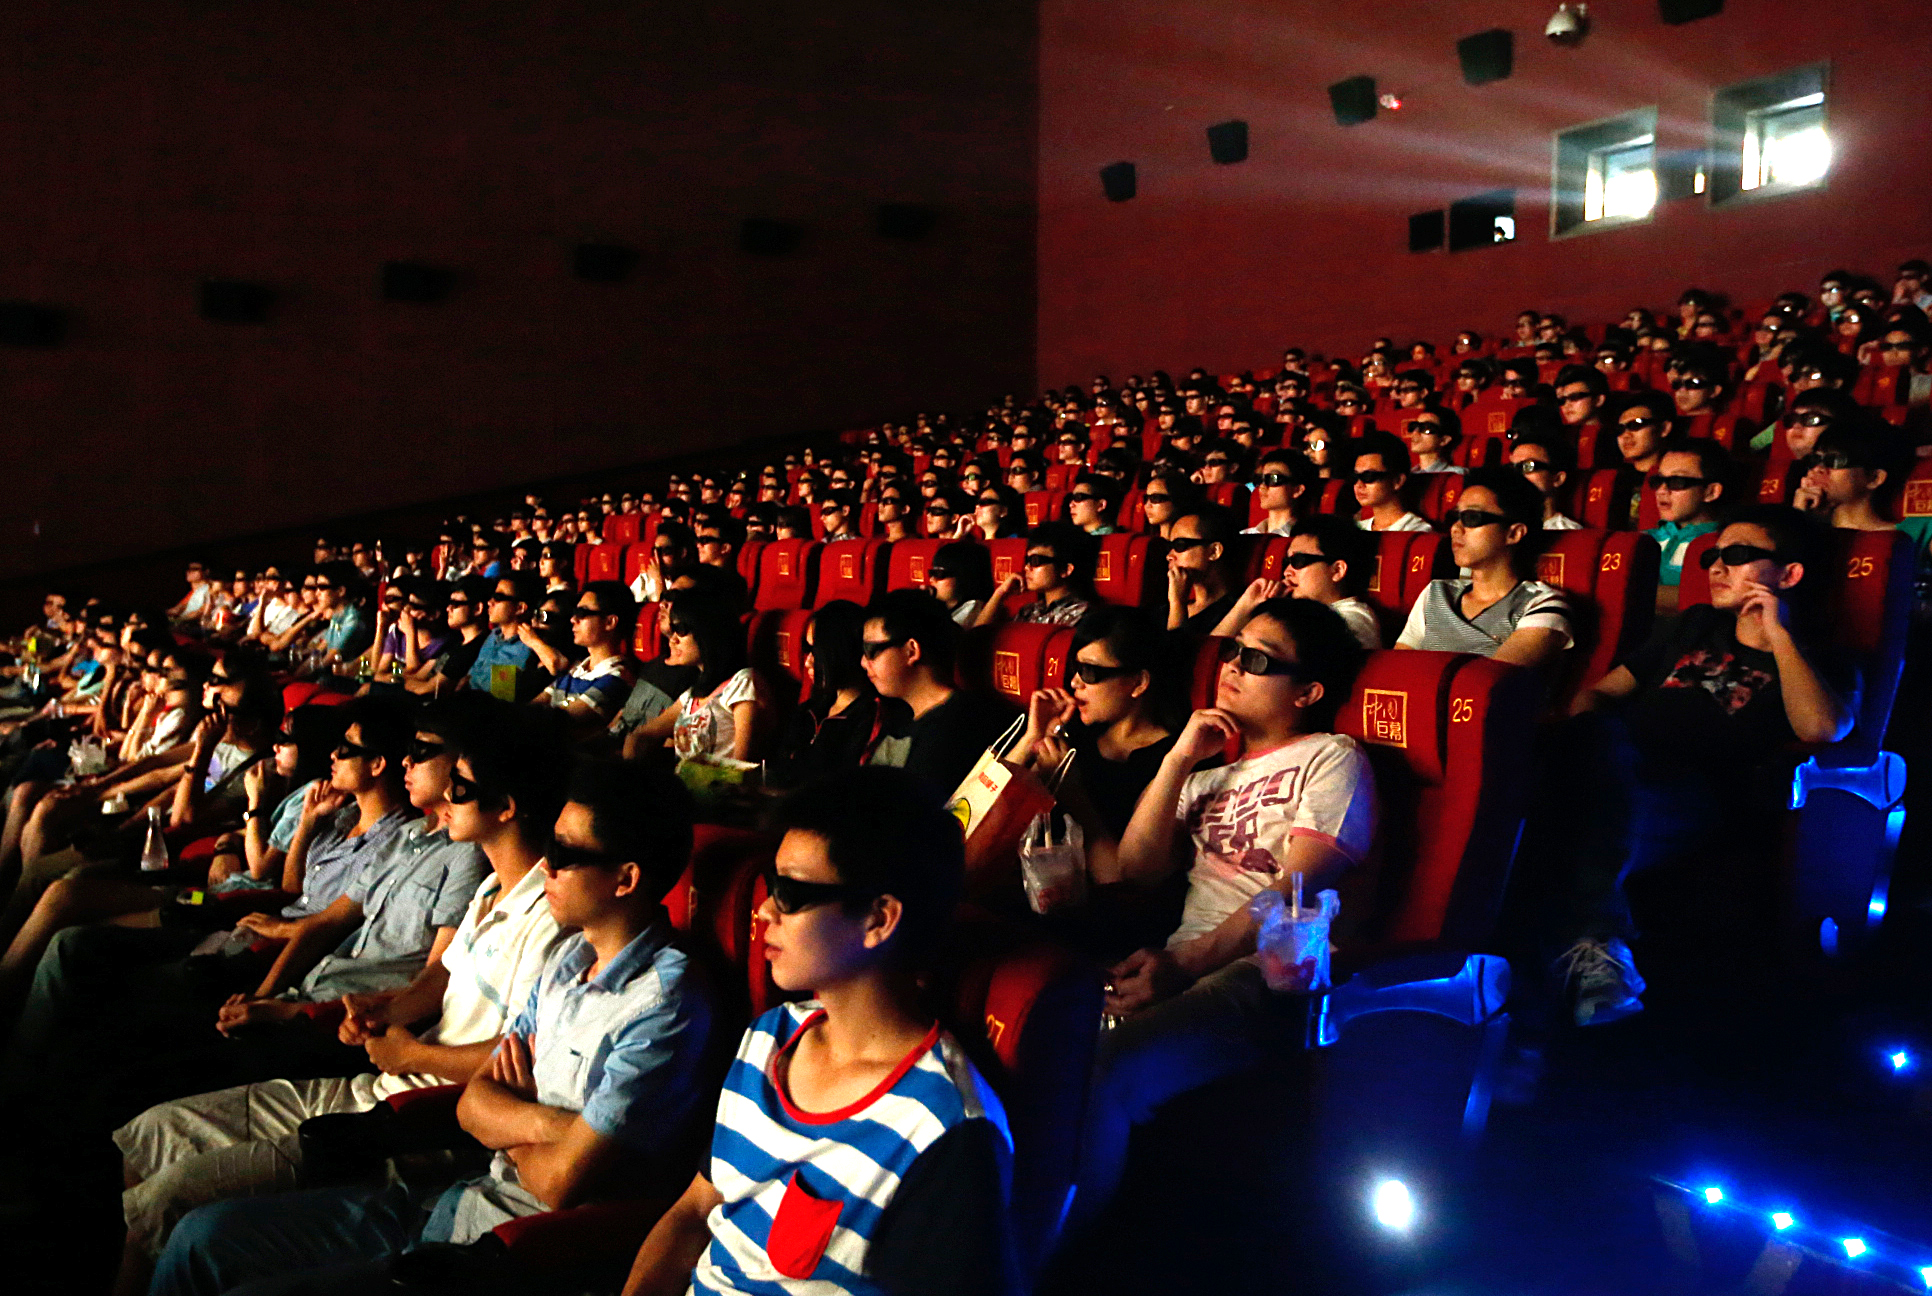 An audience watches "Transformers - Age Of Extinction" through 3D glasses at a cinema on June 27, 2014 in Wuhan, Hubei province, China. (VCG via Getty Images)